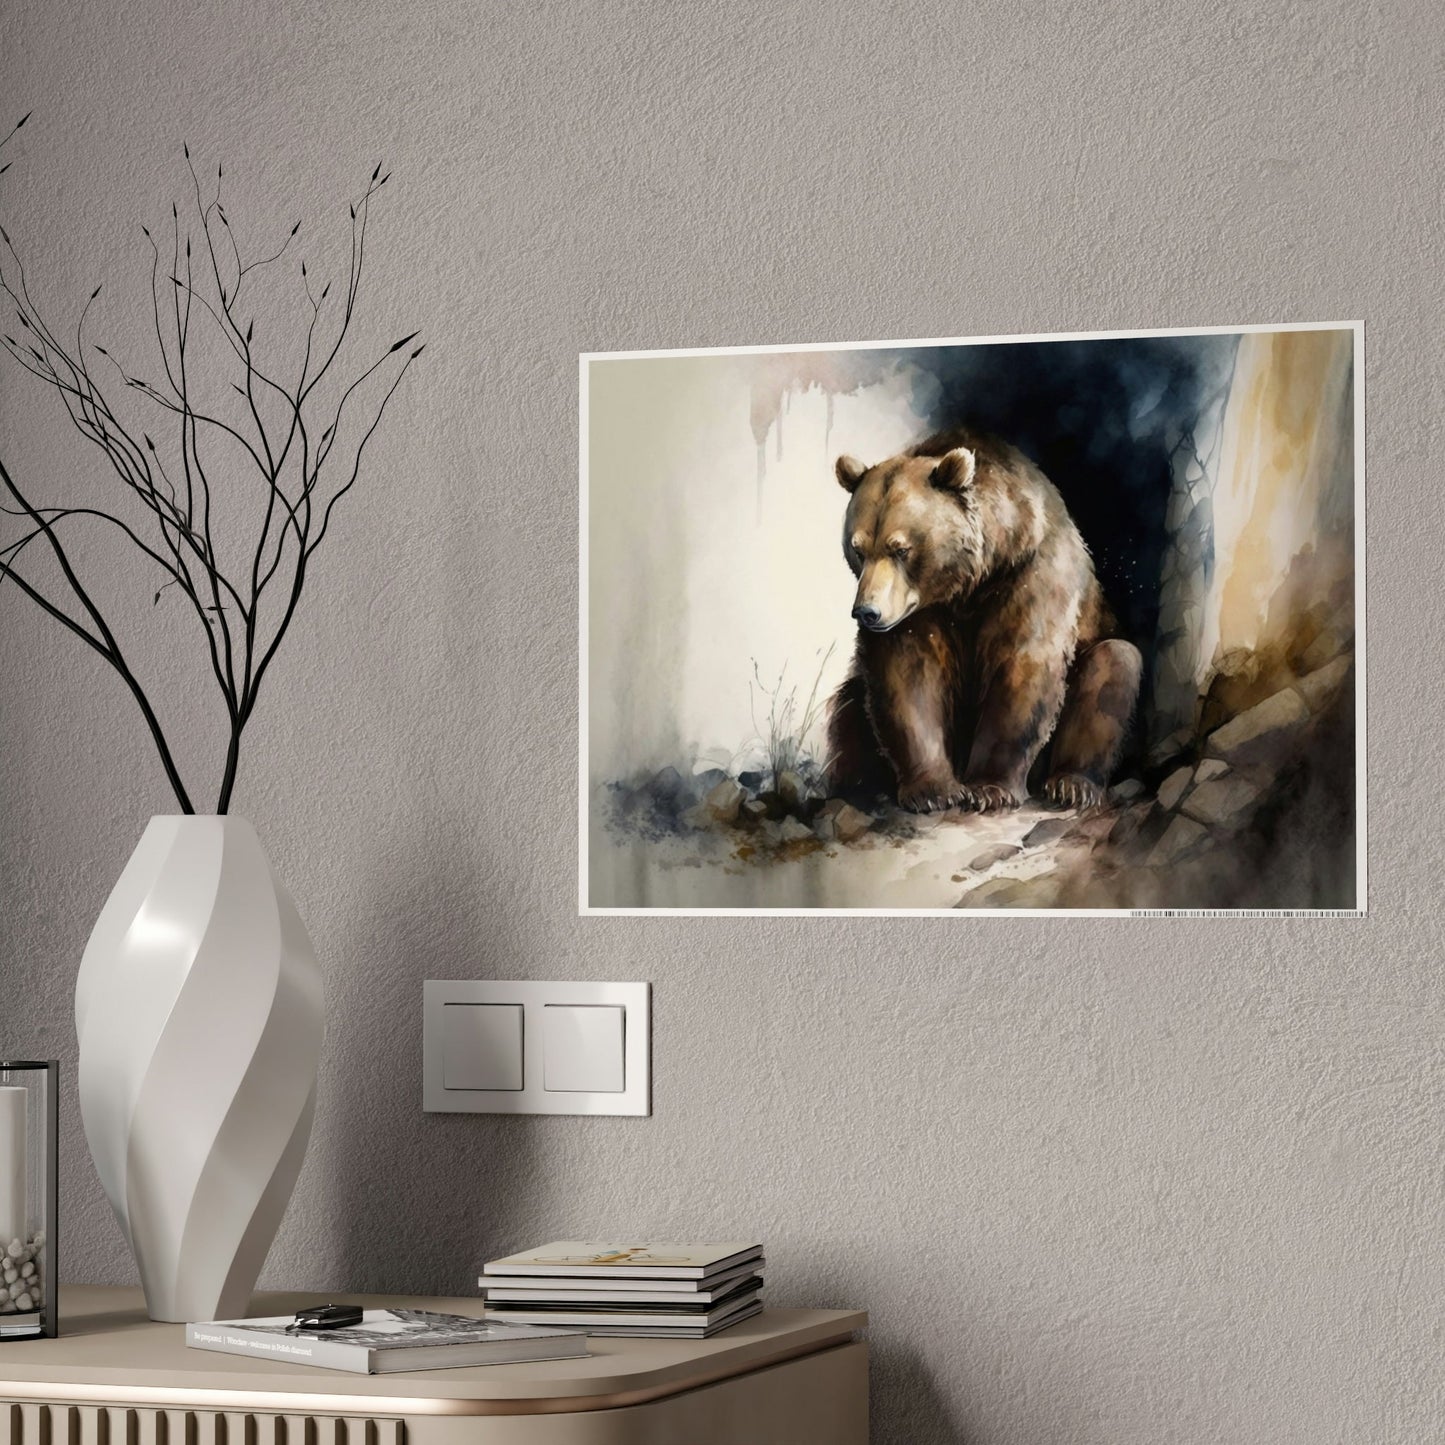 The Watchful Eye: Natural Canvas & Poster Print of a Grizzly Bear in the Wild